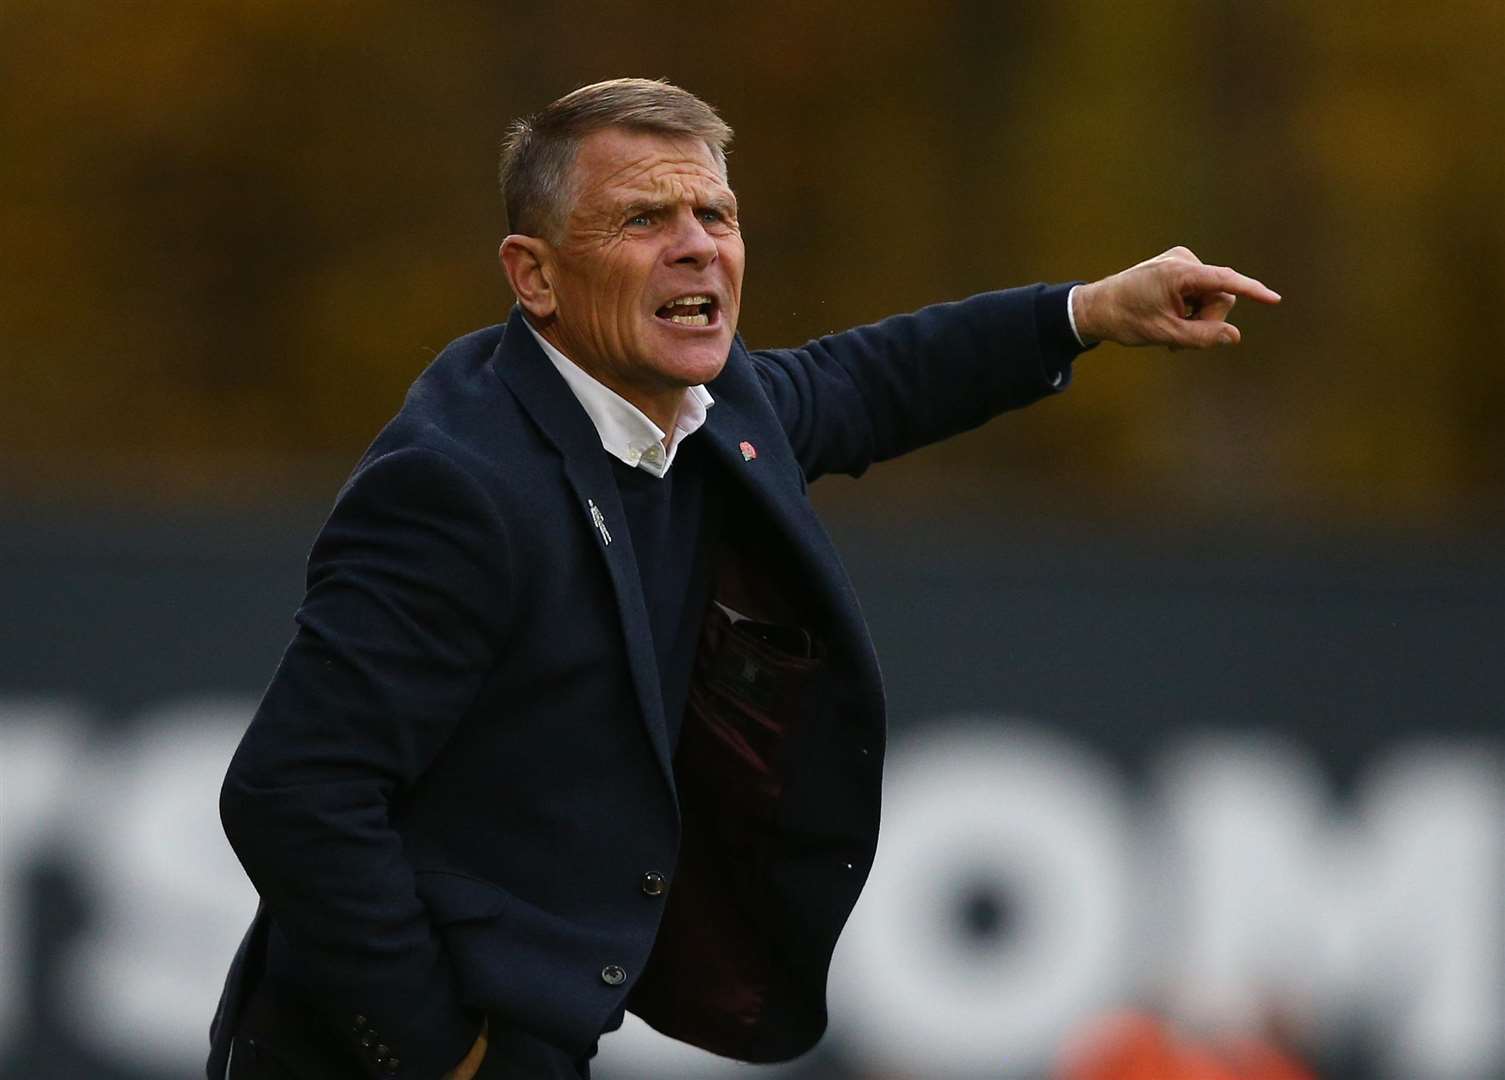 Dover manager Andy Hessenthaler. Picture: Dave Thompson/EMPICS Sport.